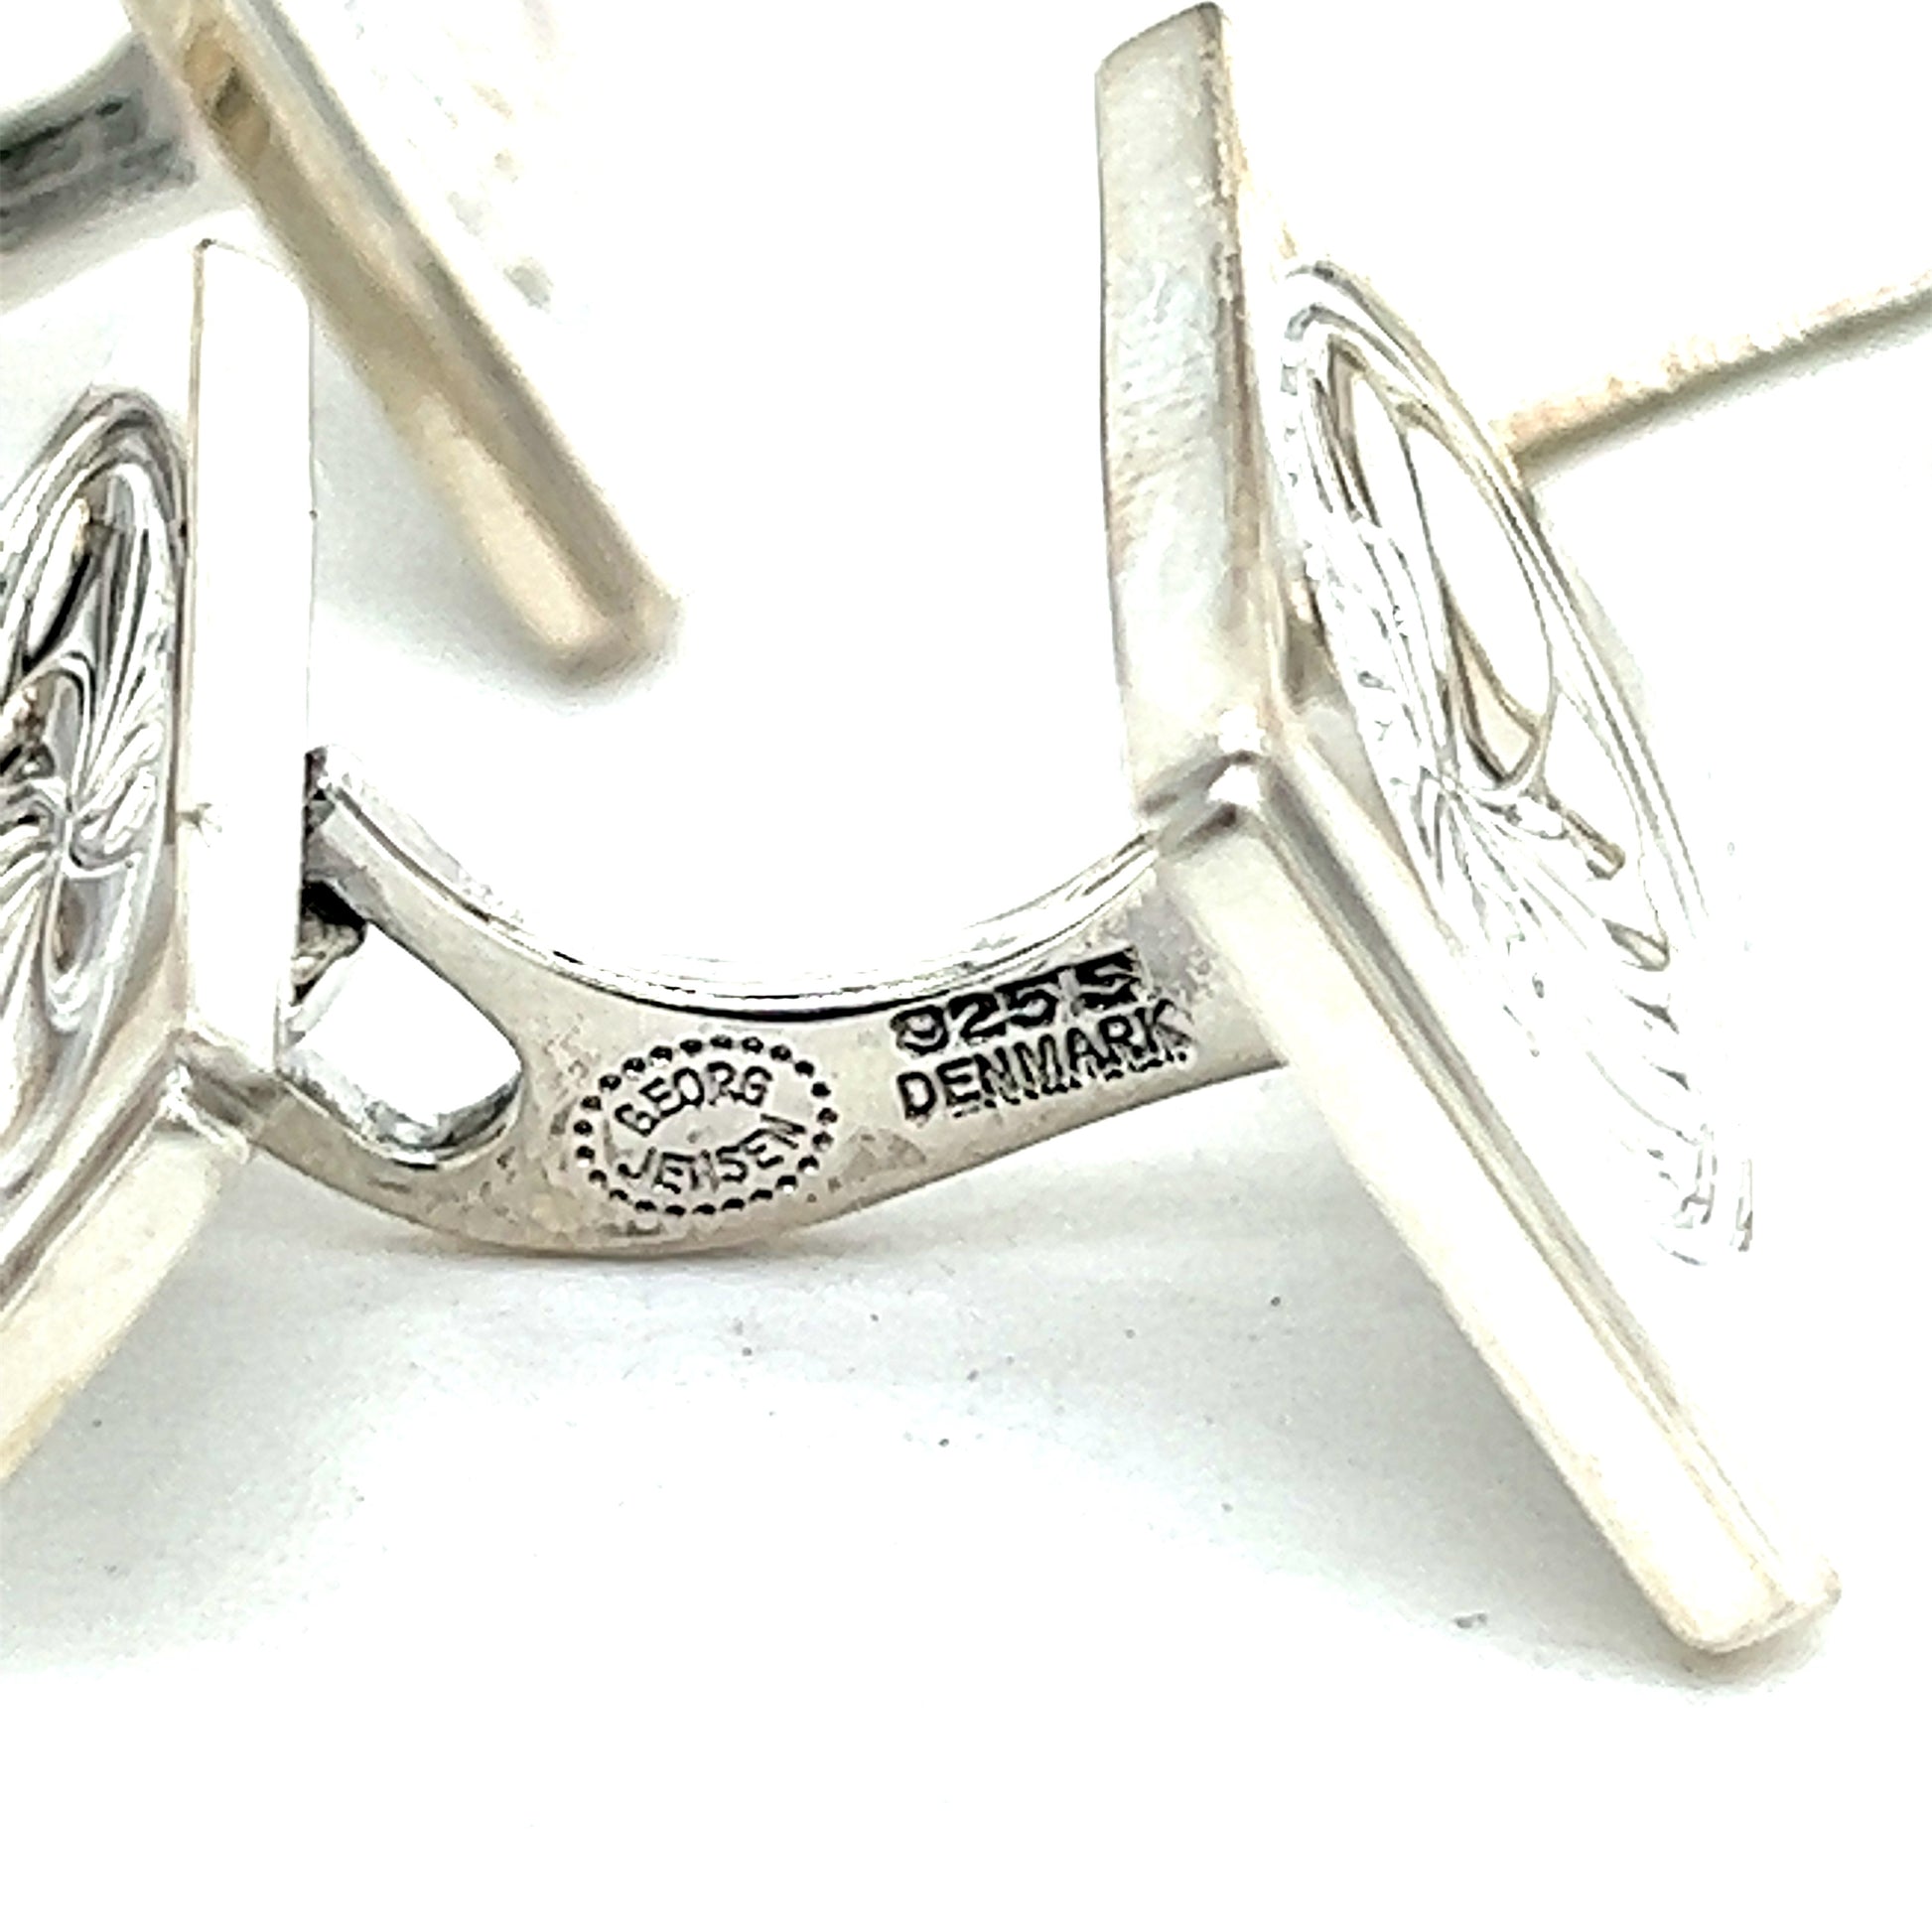 Cufflinks and Tie Pin - Silver-colored - Men